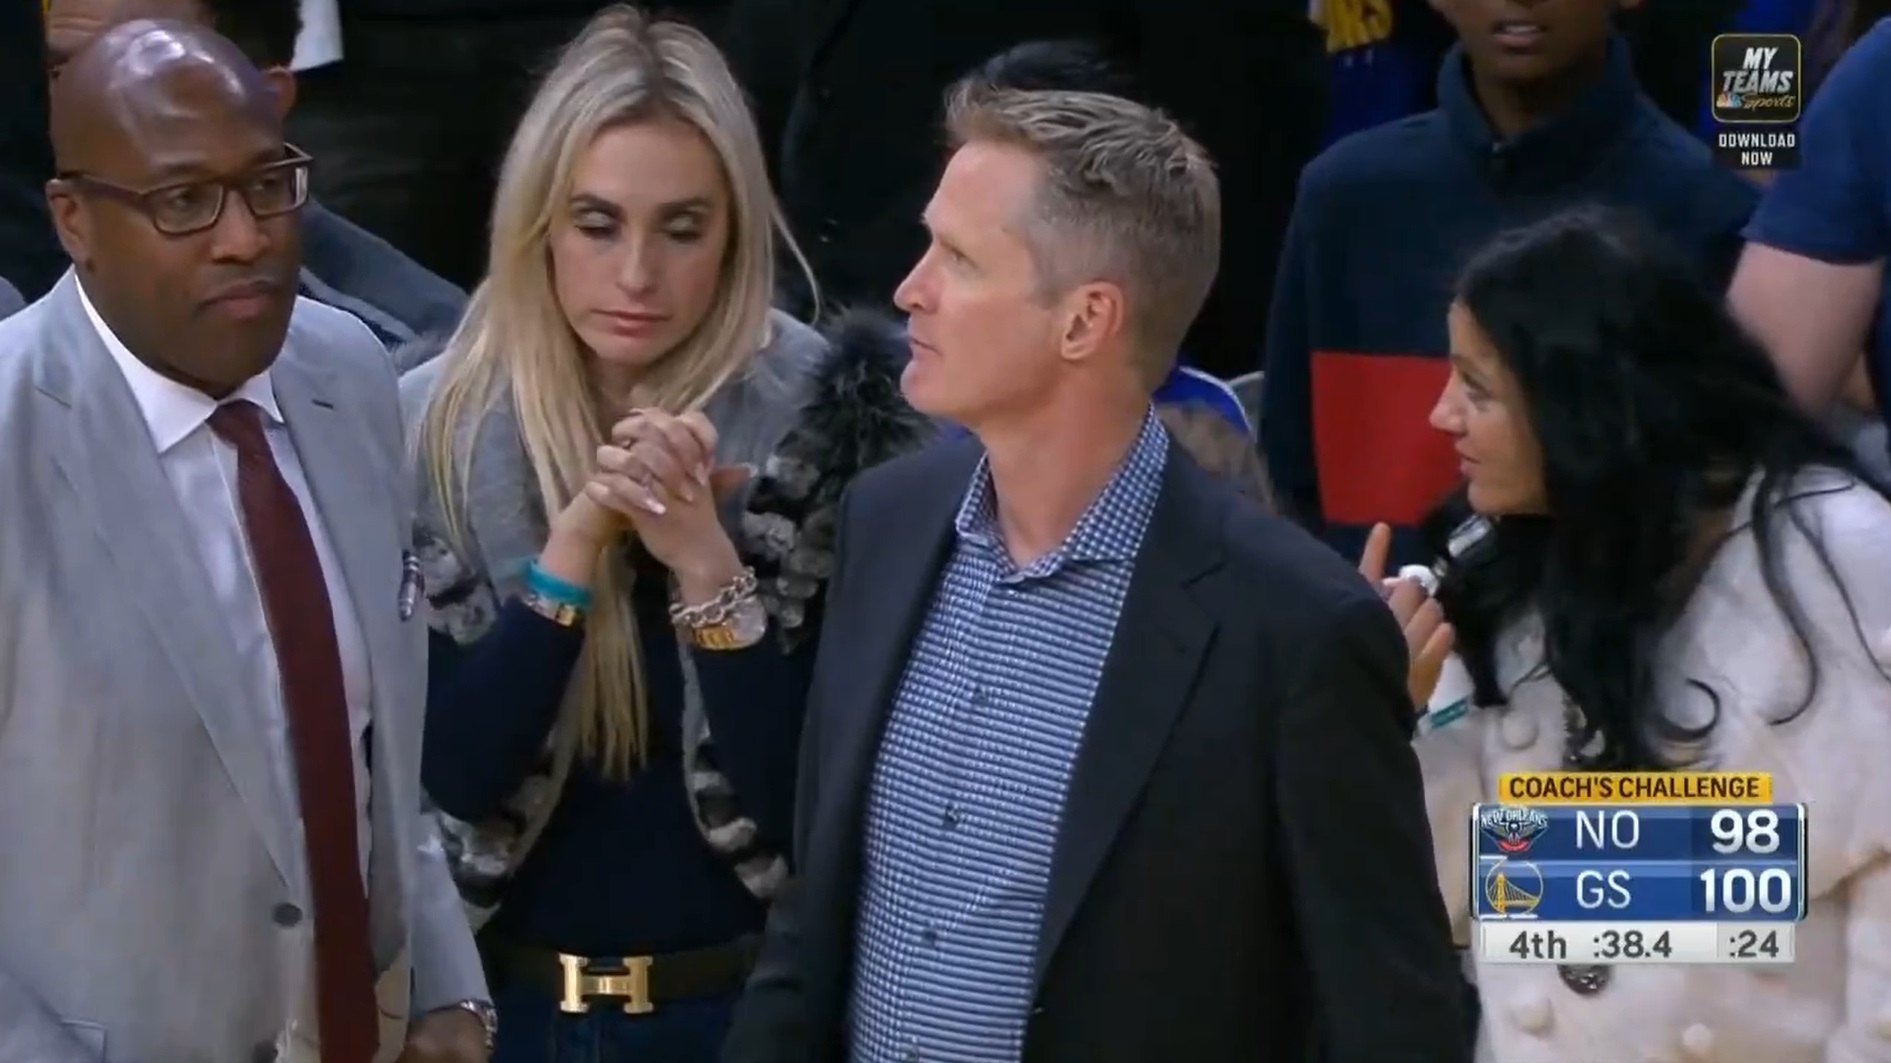 PHOTO Hot Btch Sitting Courtside Behind Steve Kerr Praying For The Warriors To Keep The Lead And Win